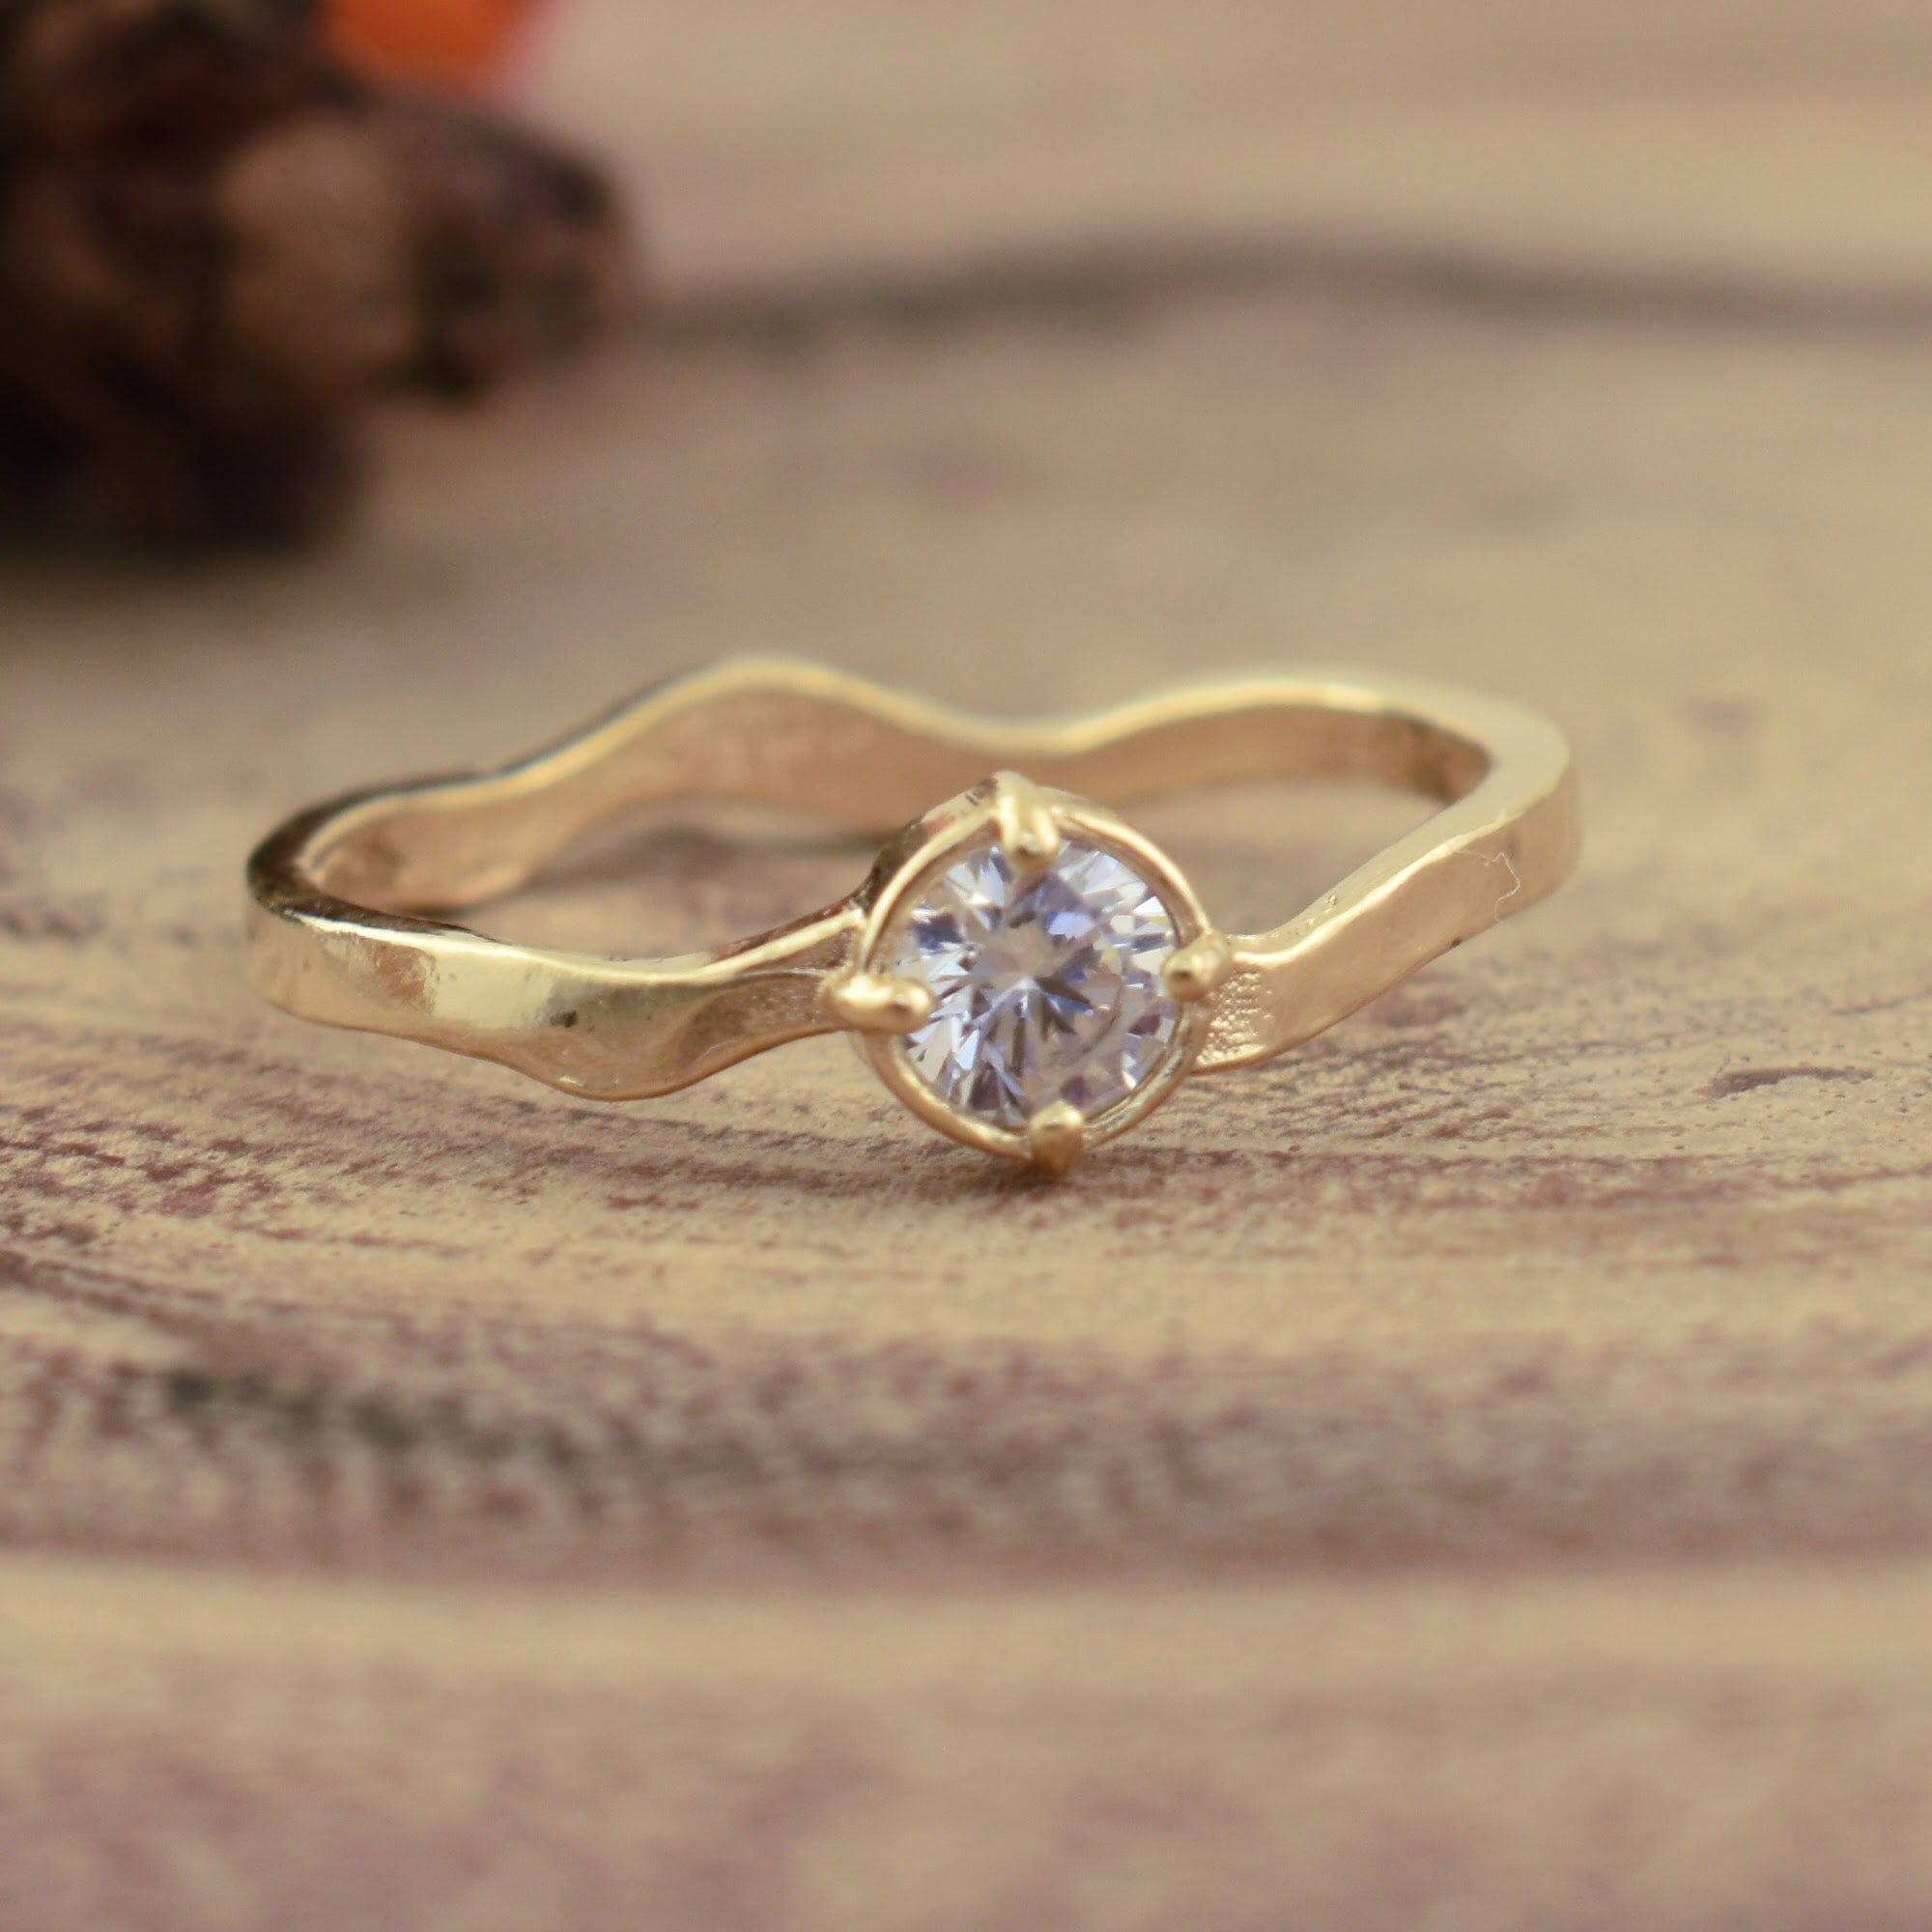 Vermeil stack ring with round cz stone